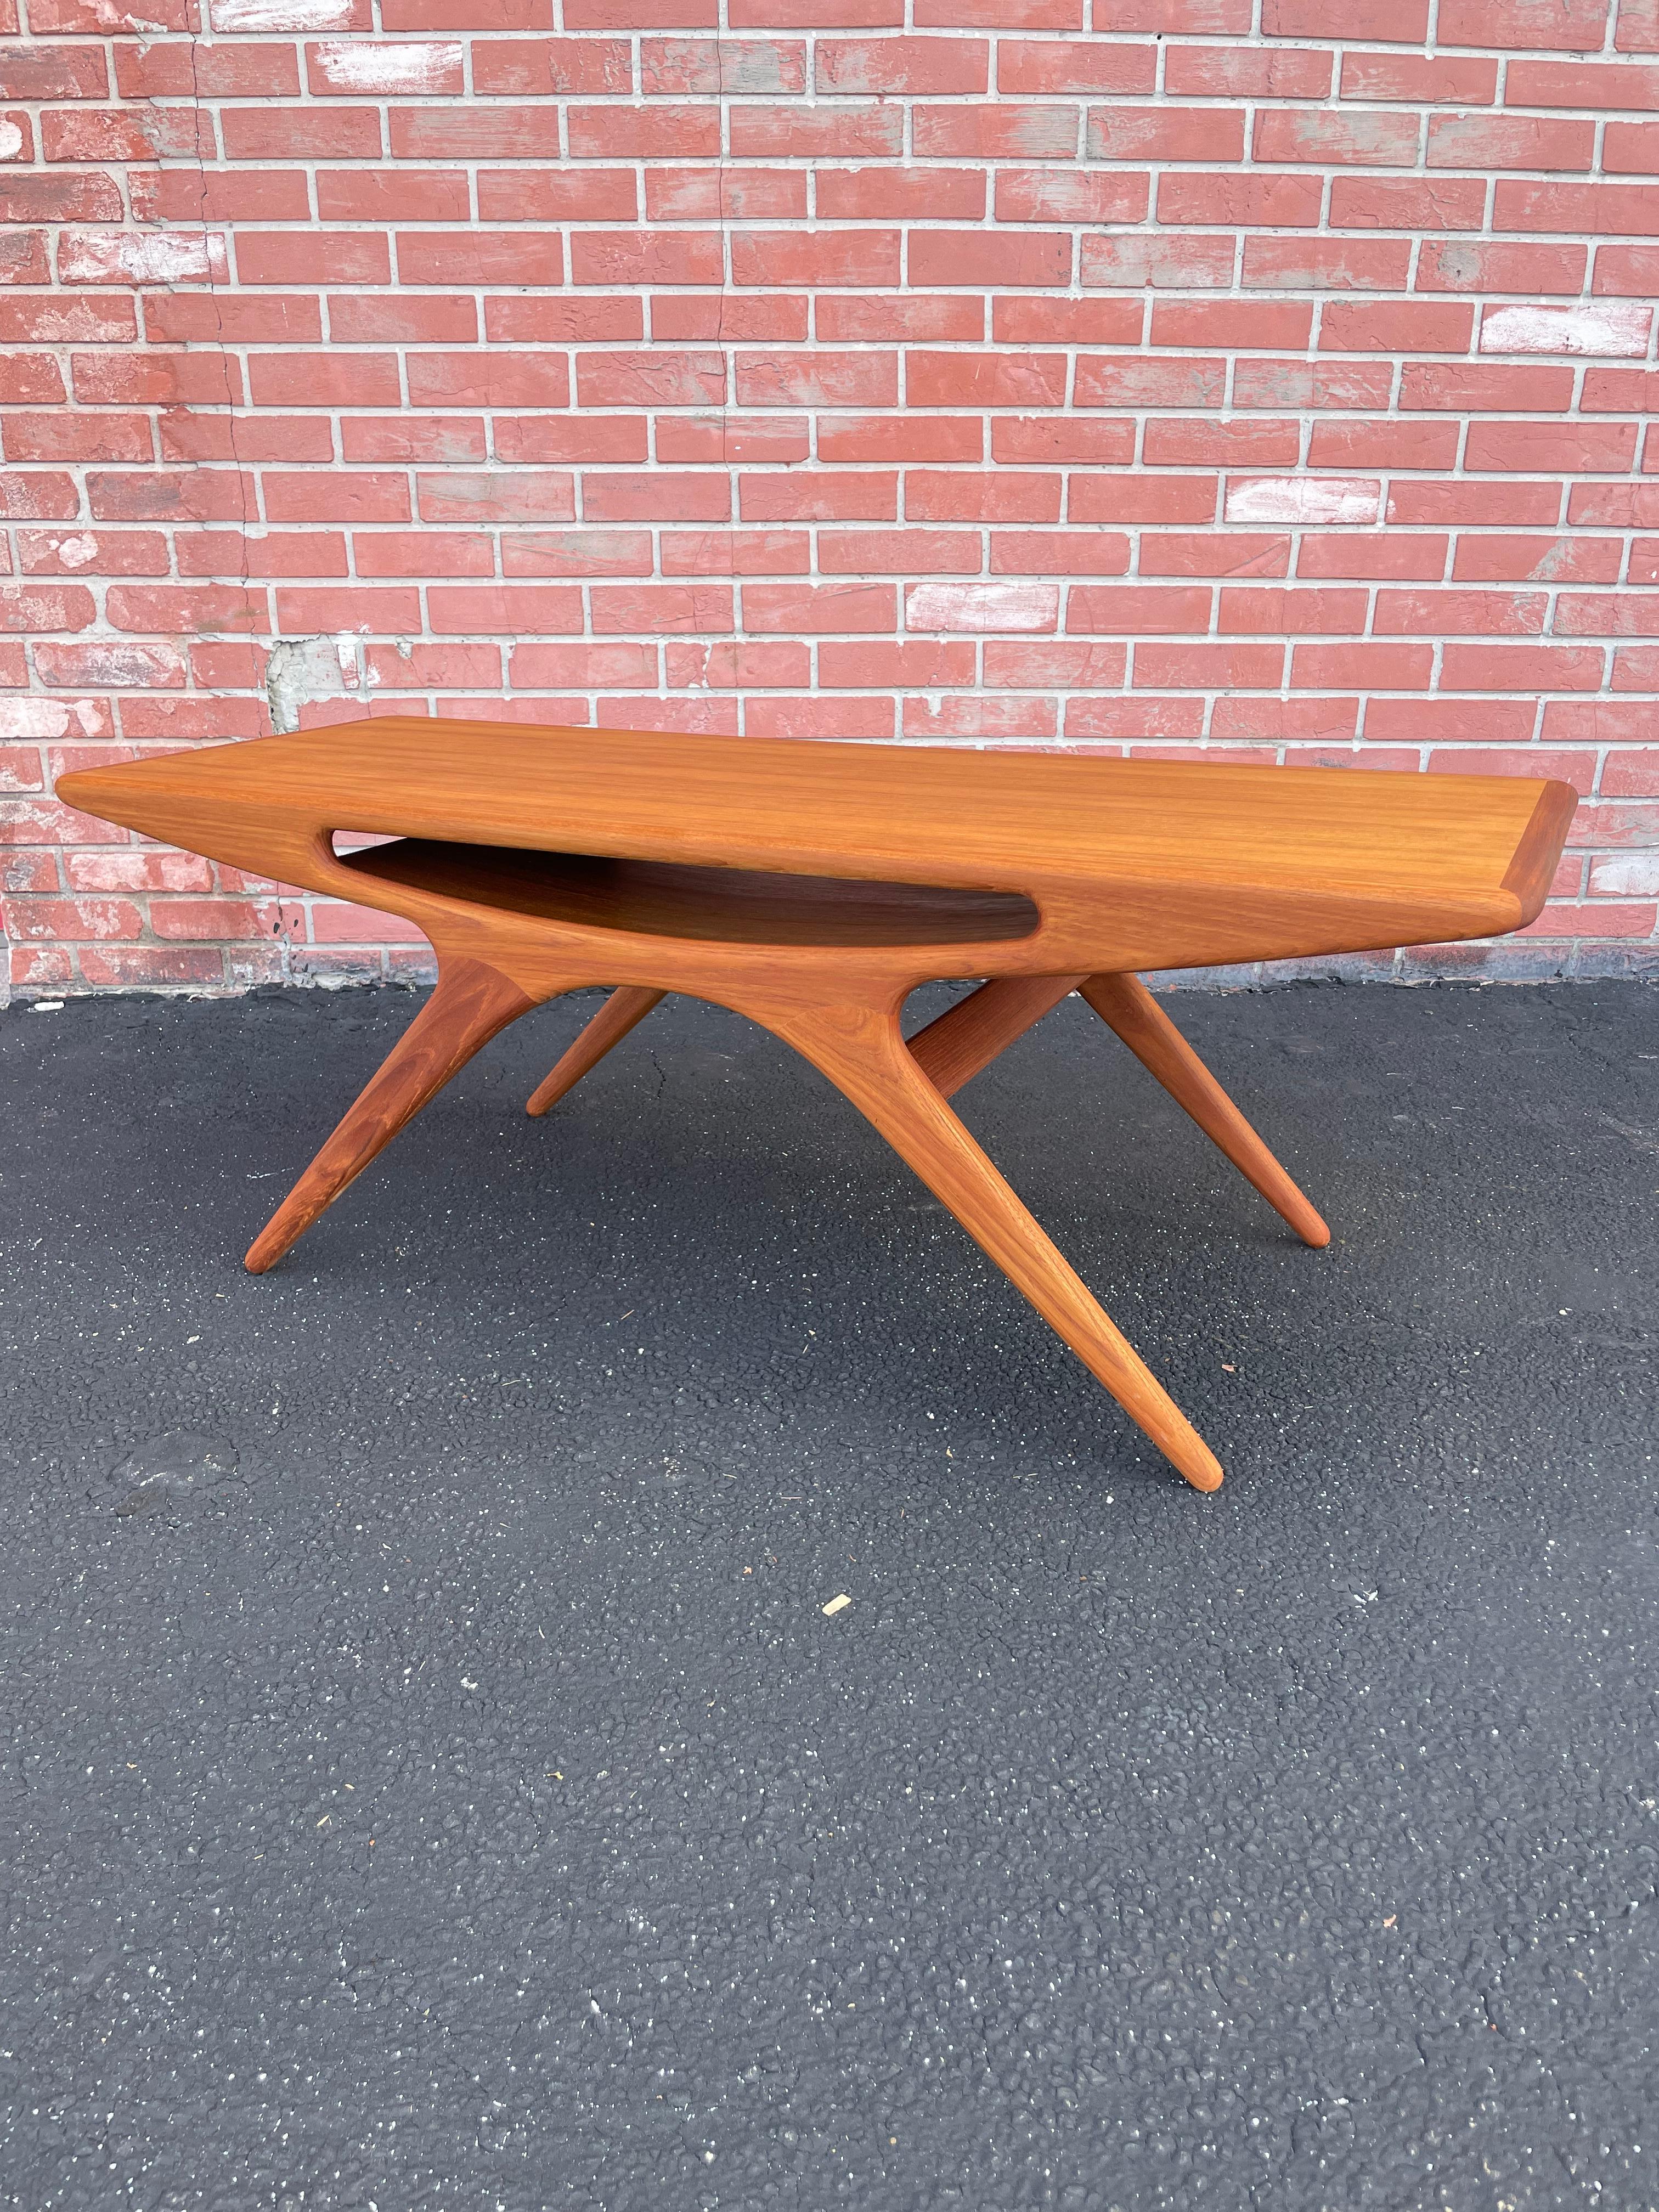 Iconic Smile Table by Johannes Andersen. Designed in 1957 for CFC Silkeborg in Denmark.  Slanted legs and a middle storage shelf with rounded edges.